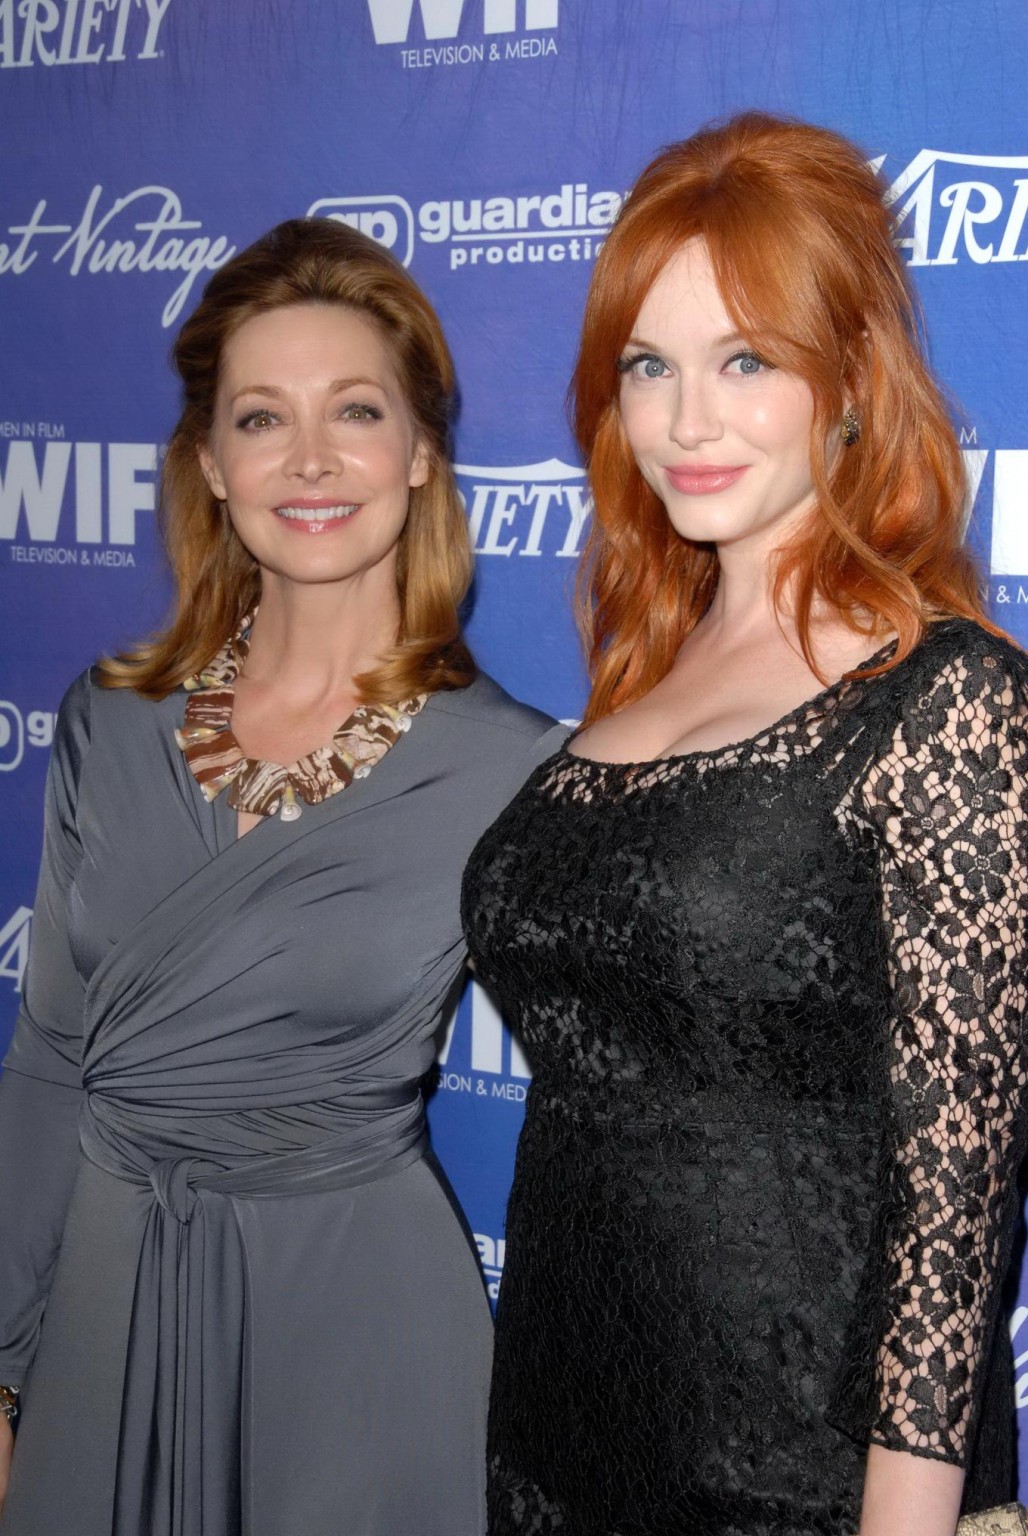 Christina Hendricks shows cleavage wearing a black lace dress at Variety Pre-EMM #75252237